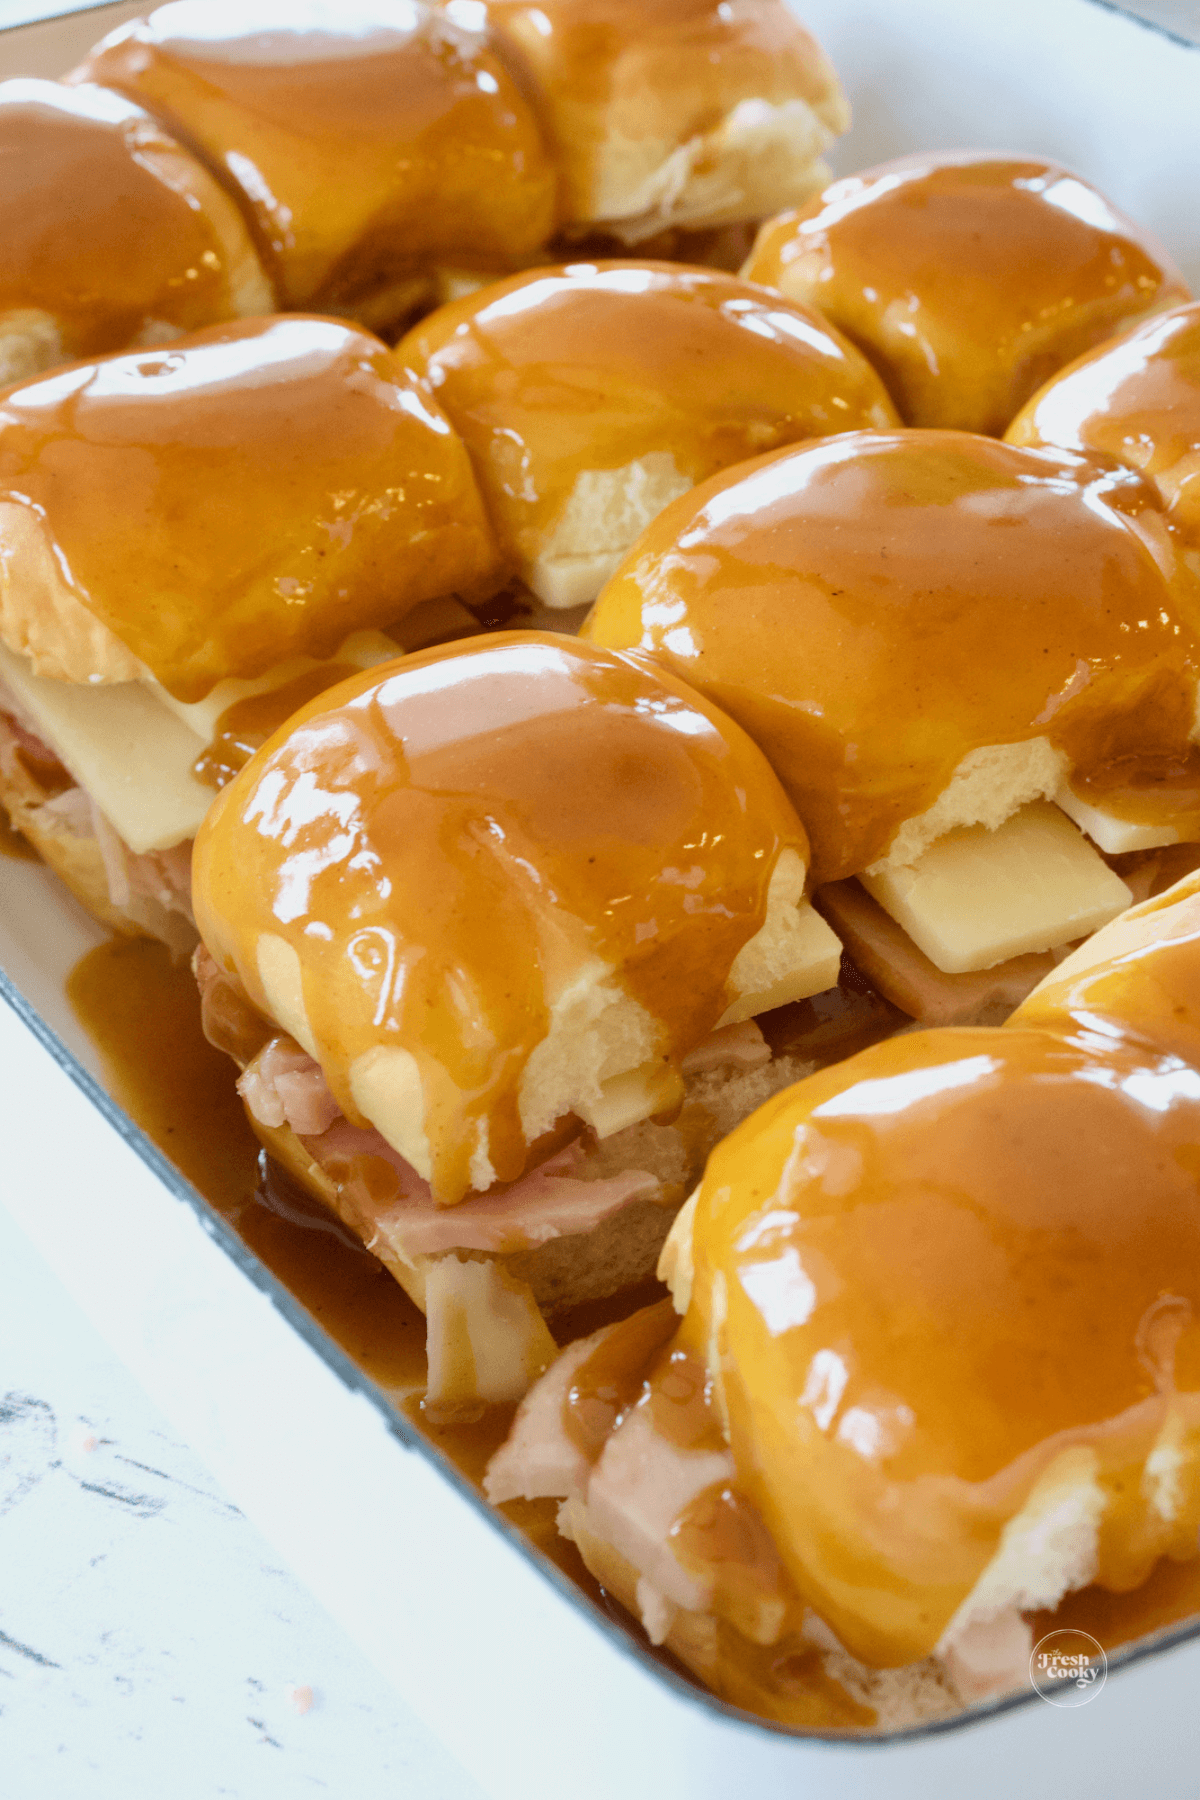 Sauce poured over tops of turkey sliders.